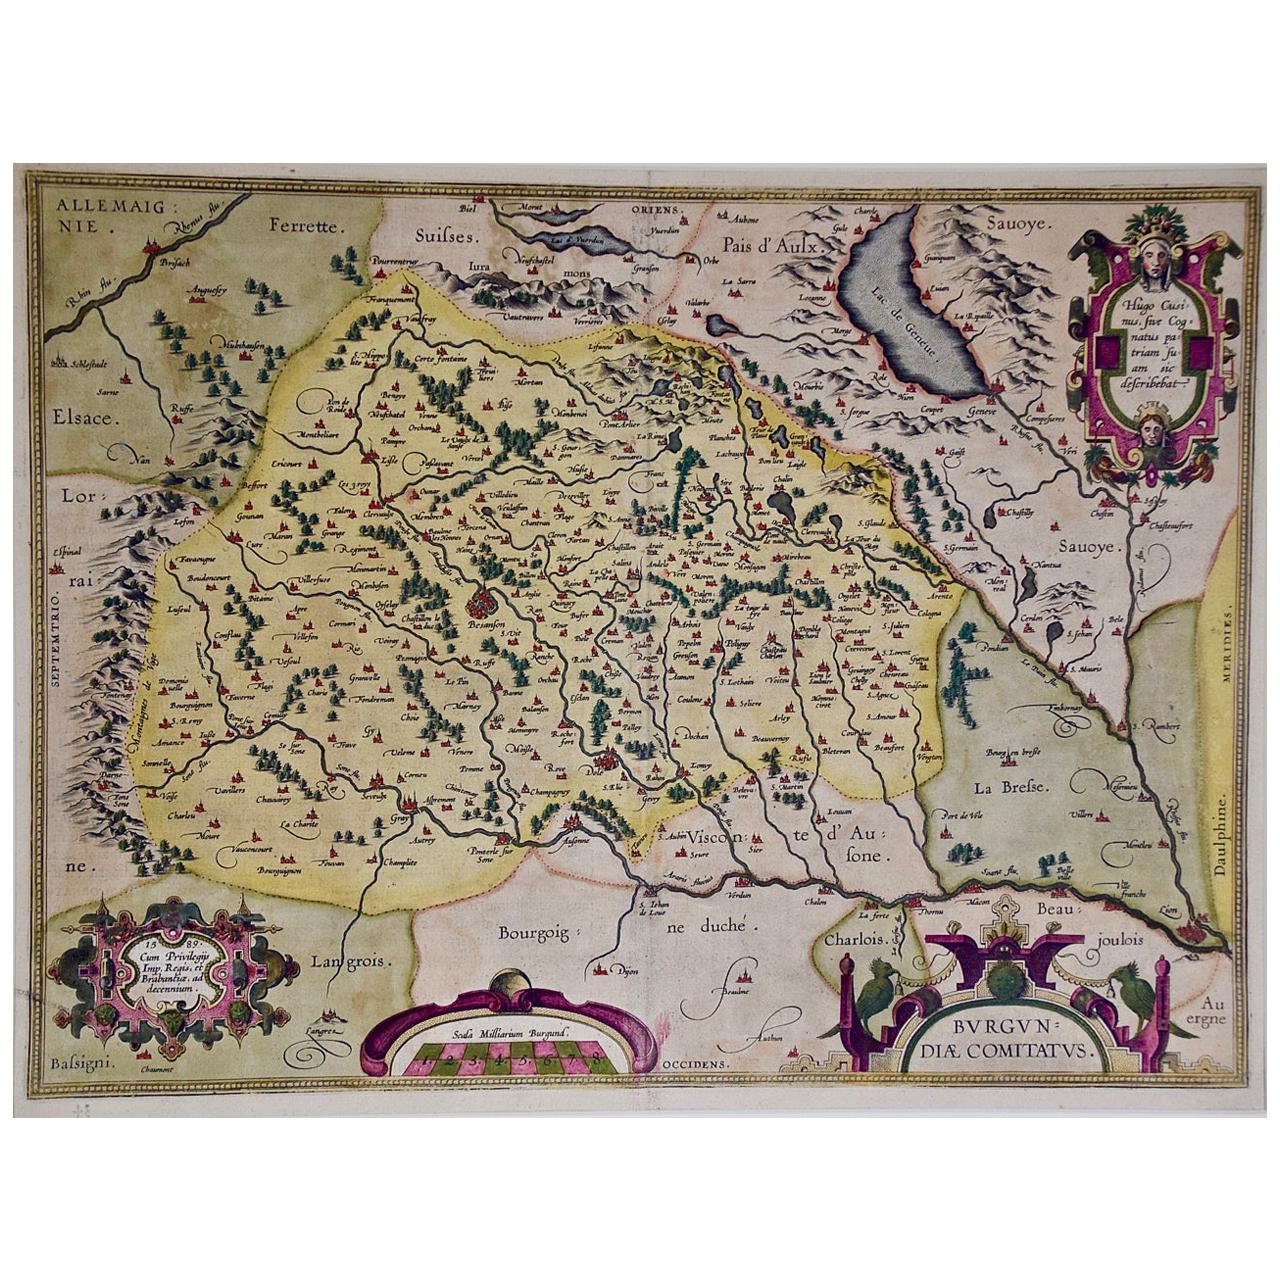 16th Century Hand-Colored Map of the Burgundy Wine Region of France by Ortelius